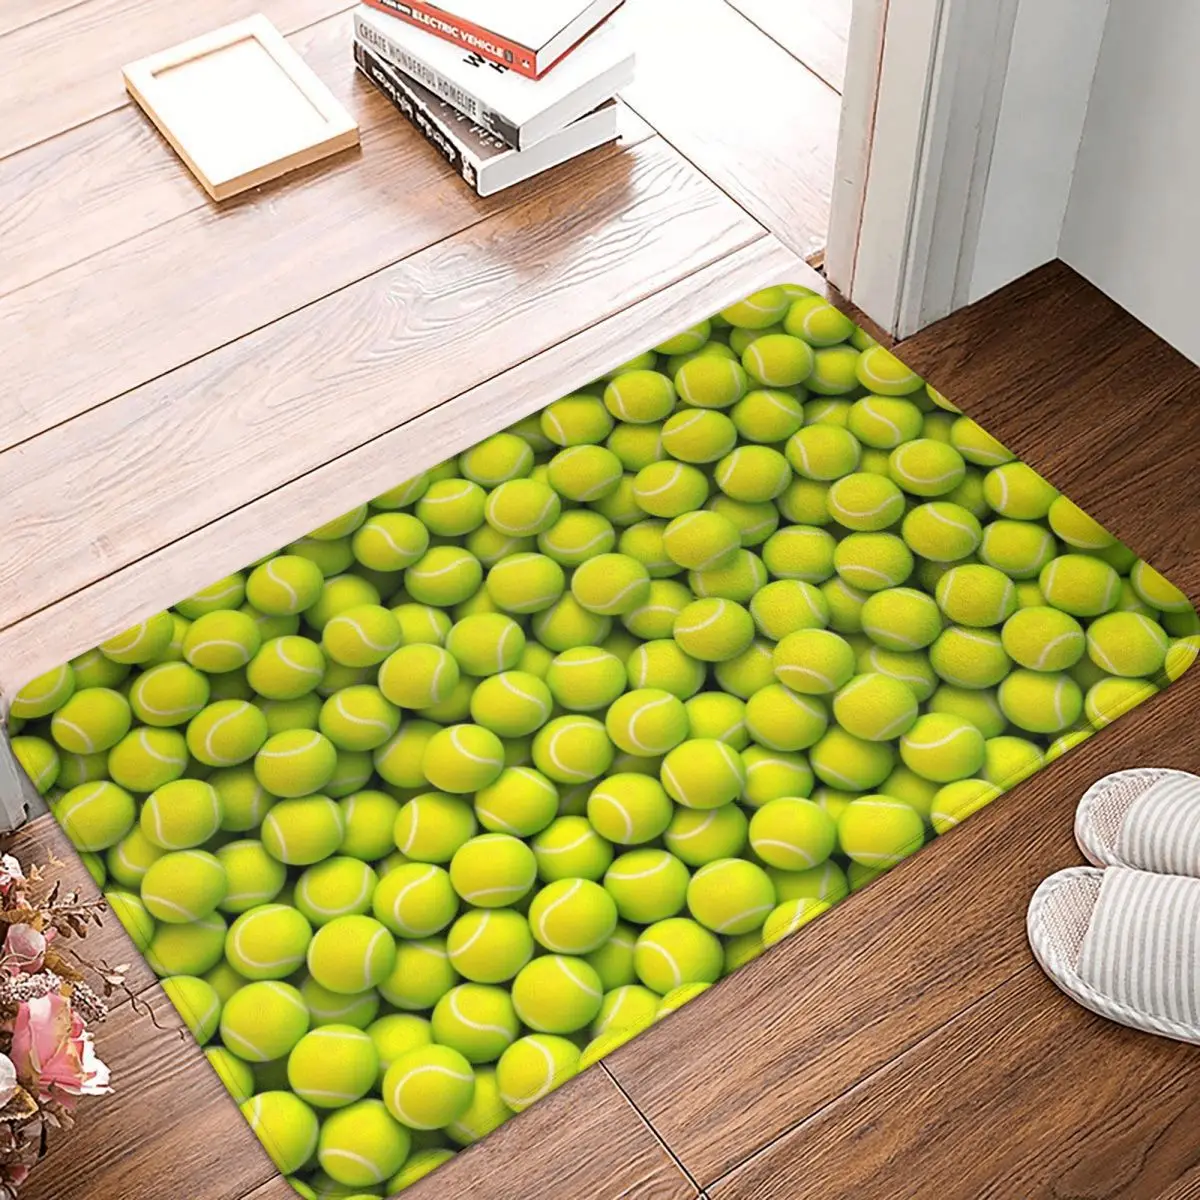 

Love Tennis Balls At The Court With Coach Doormat Rug Carpet Mat Footpad Polyester Non-slip Sand Scraping Front Room Corridor